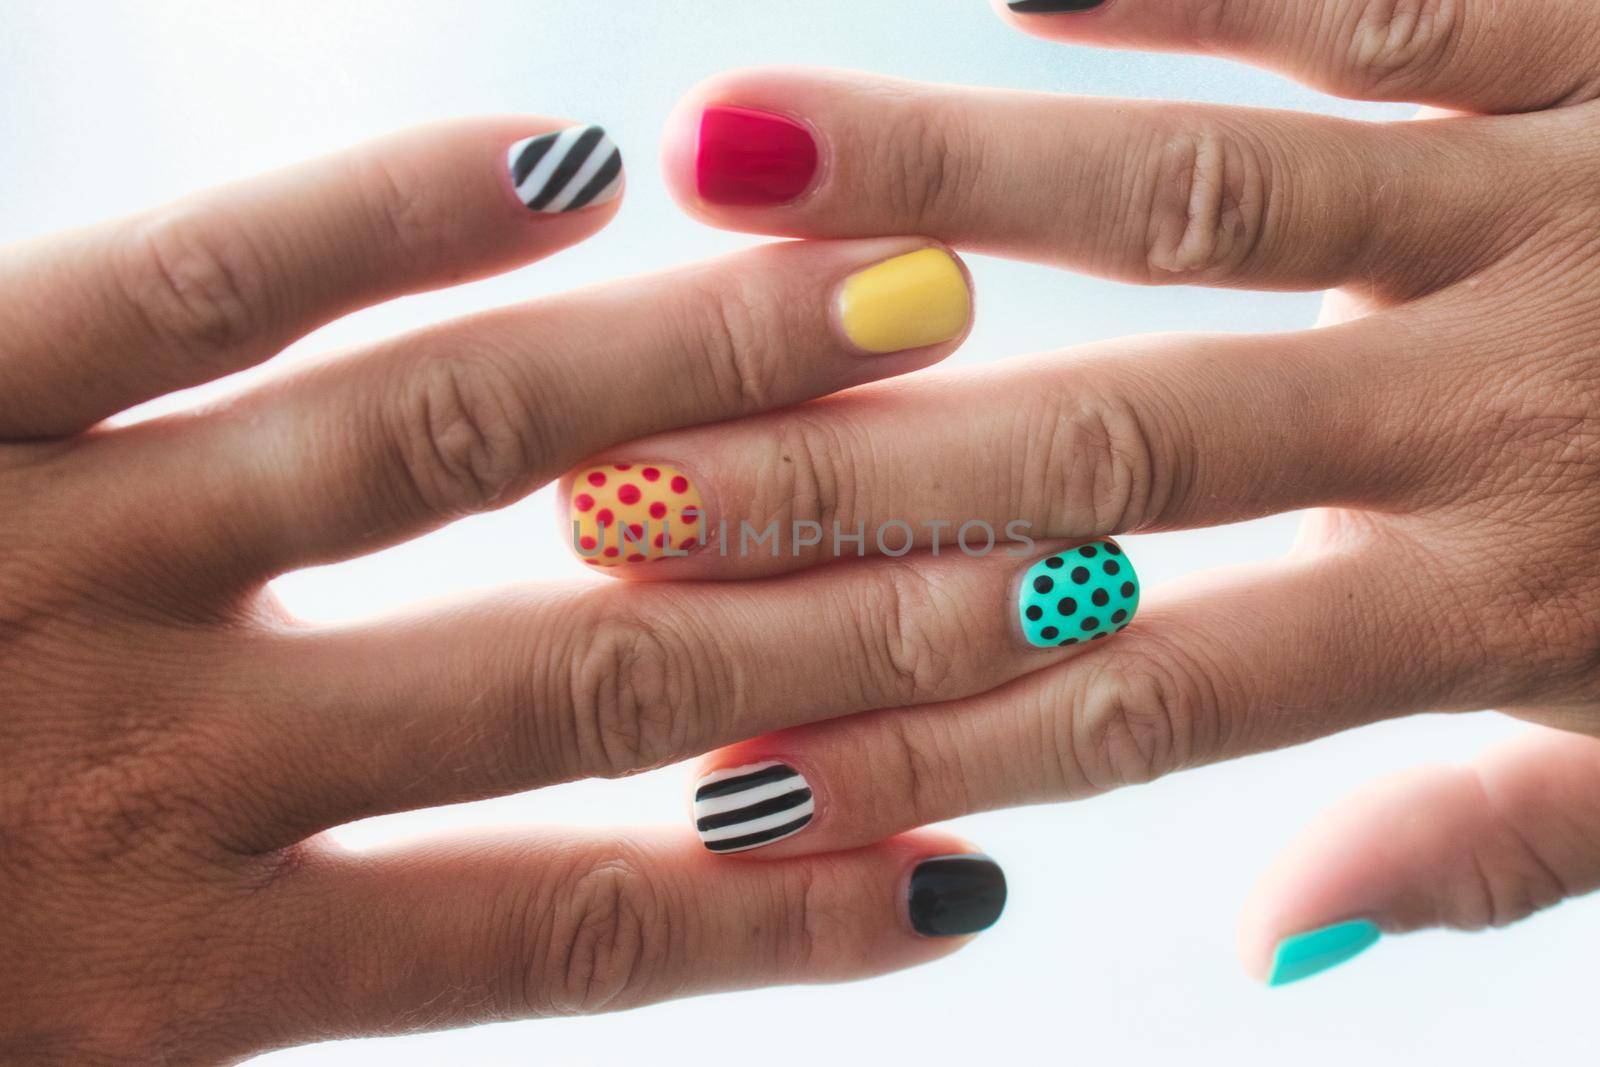 A pair of female hands with colored painted nails with different patterns